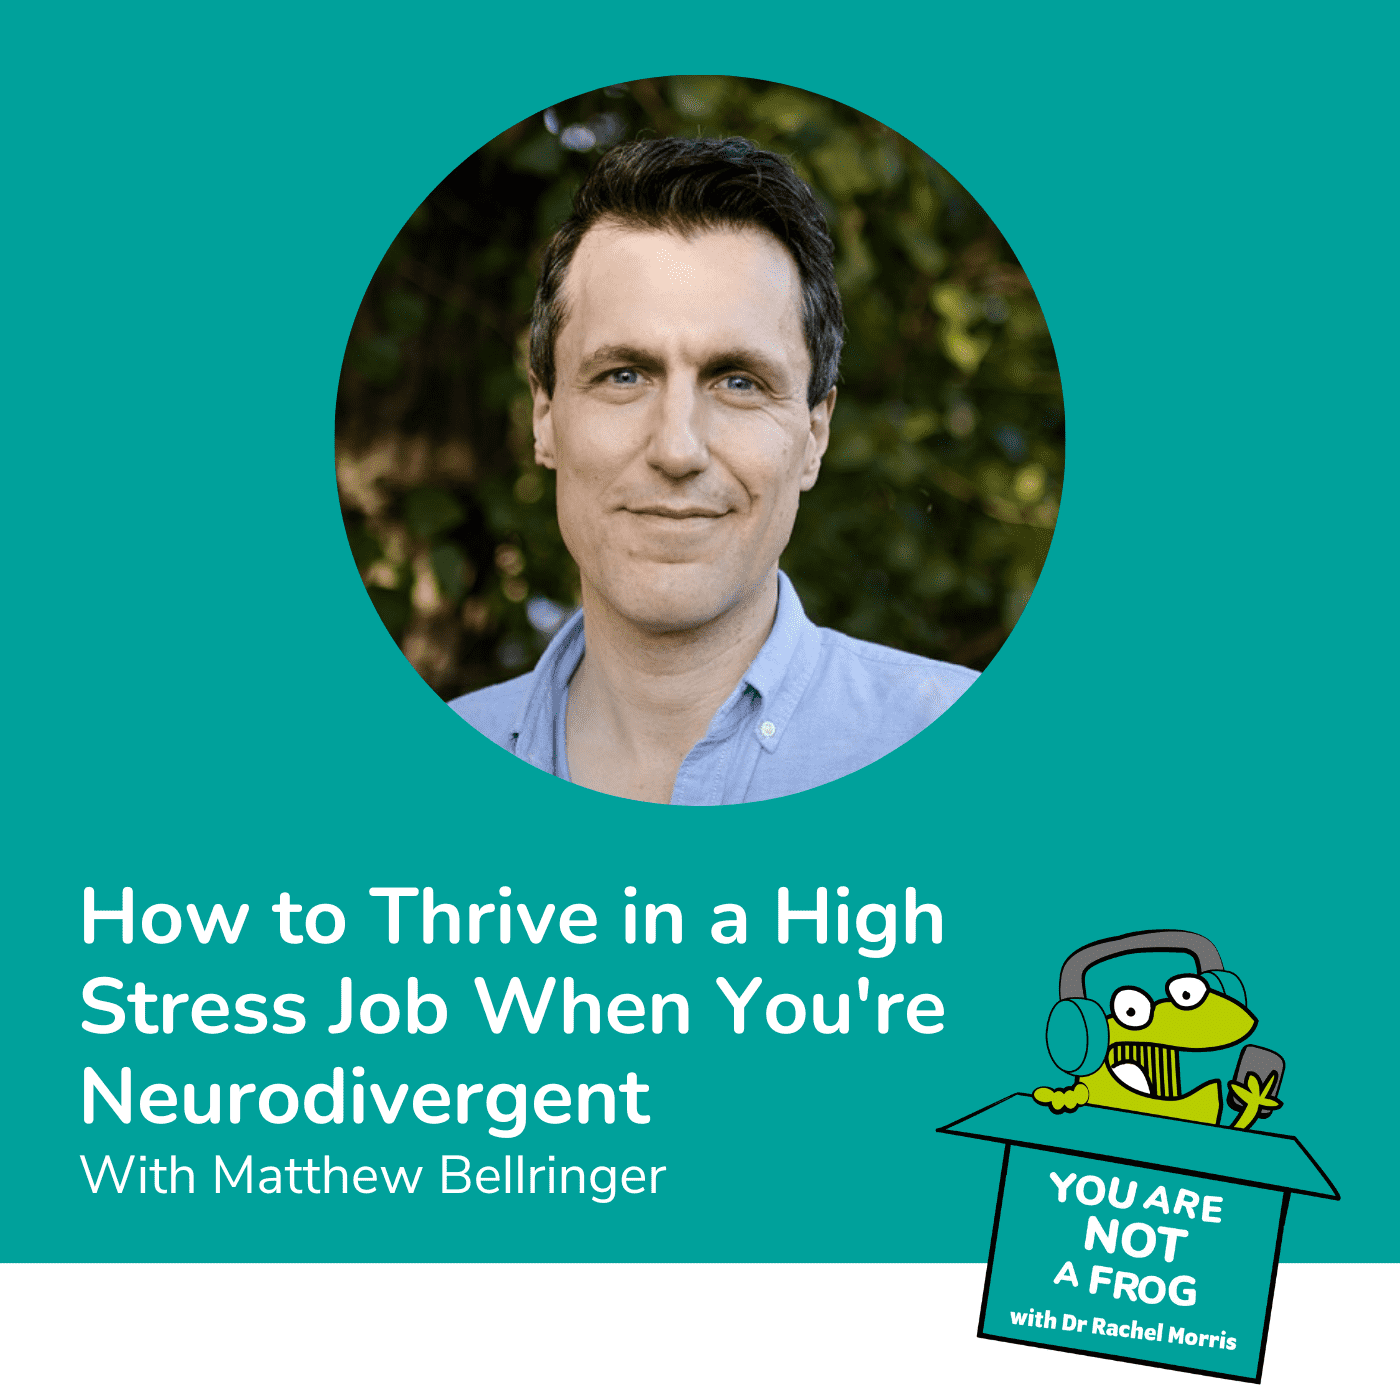 How to Thrive in a High-Stress Job When You’re Neurodivergent